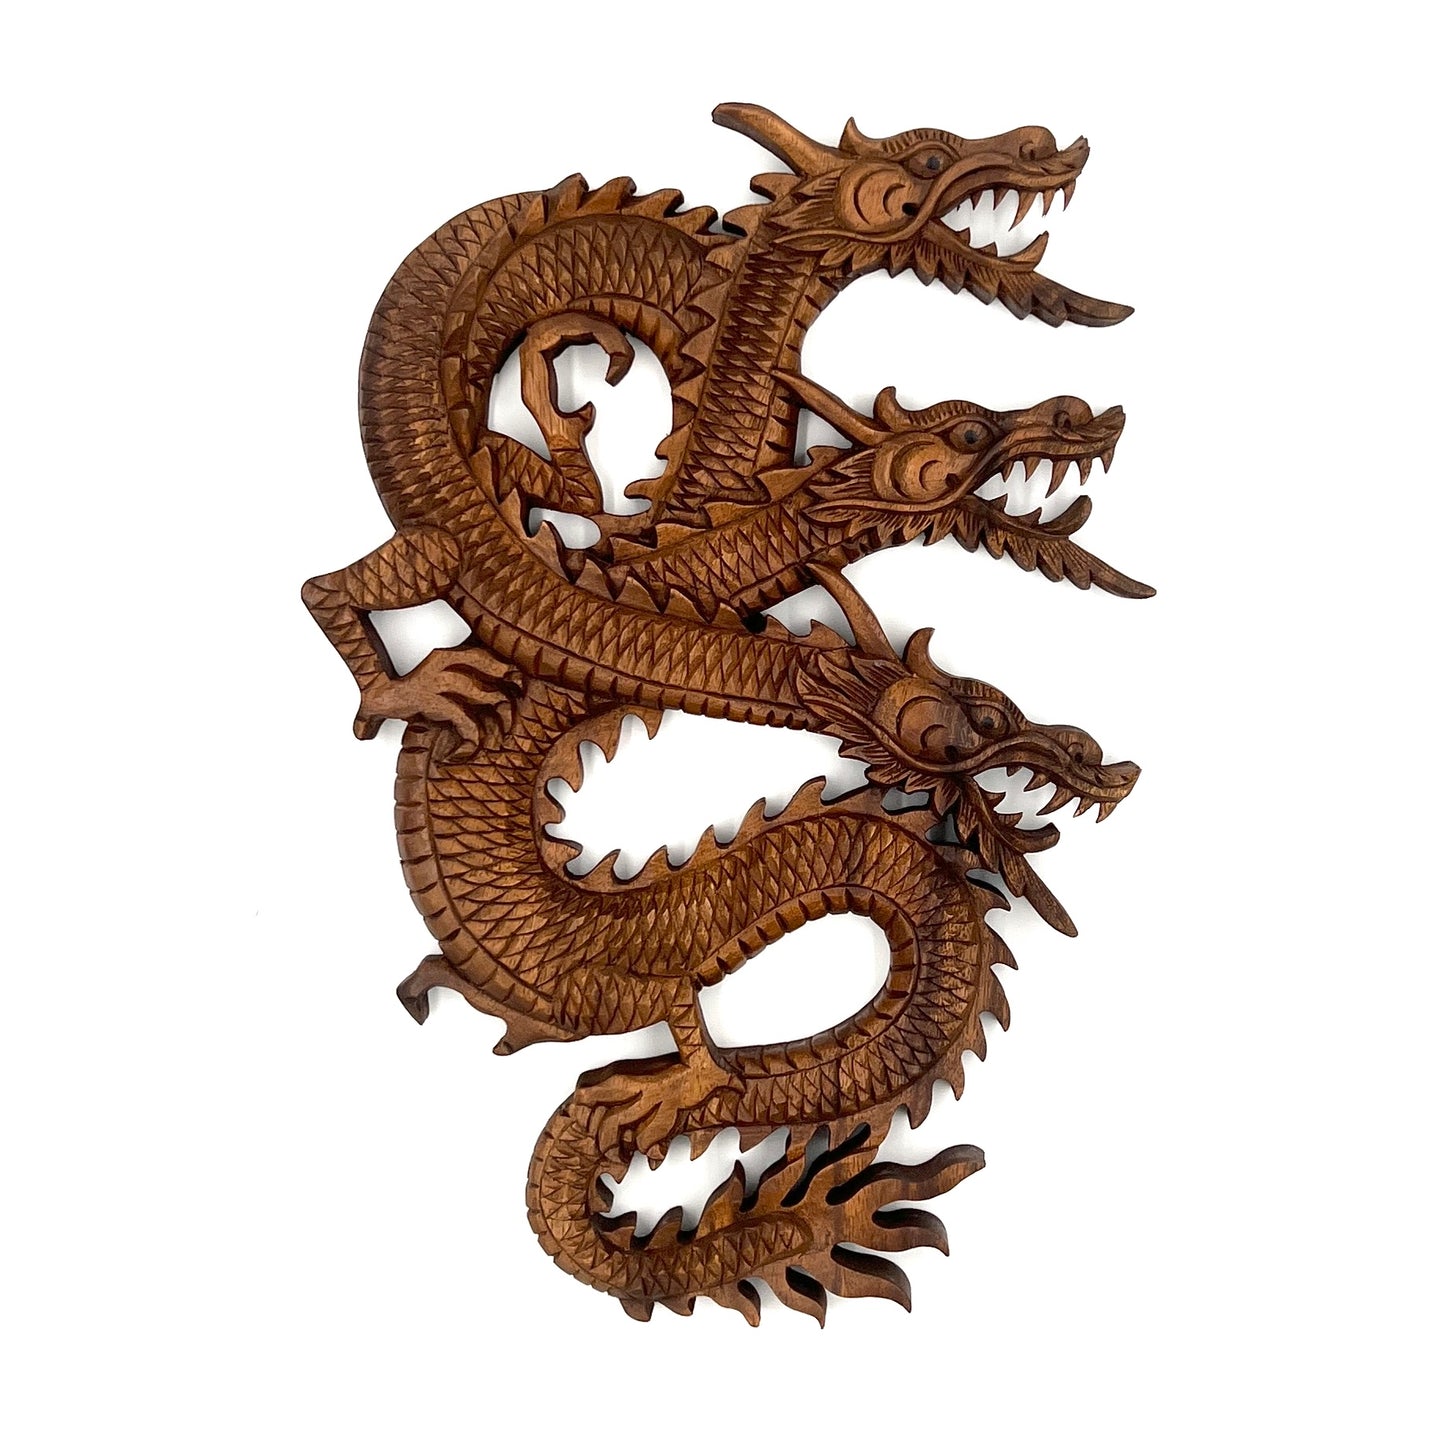 3 Headed Dragon Panel Carving